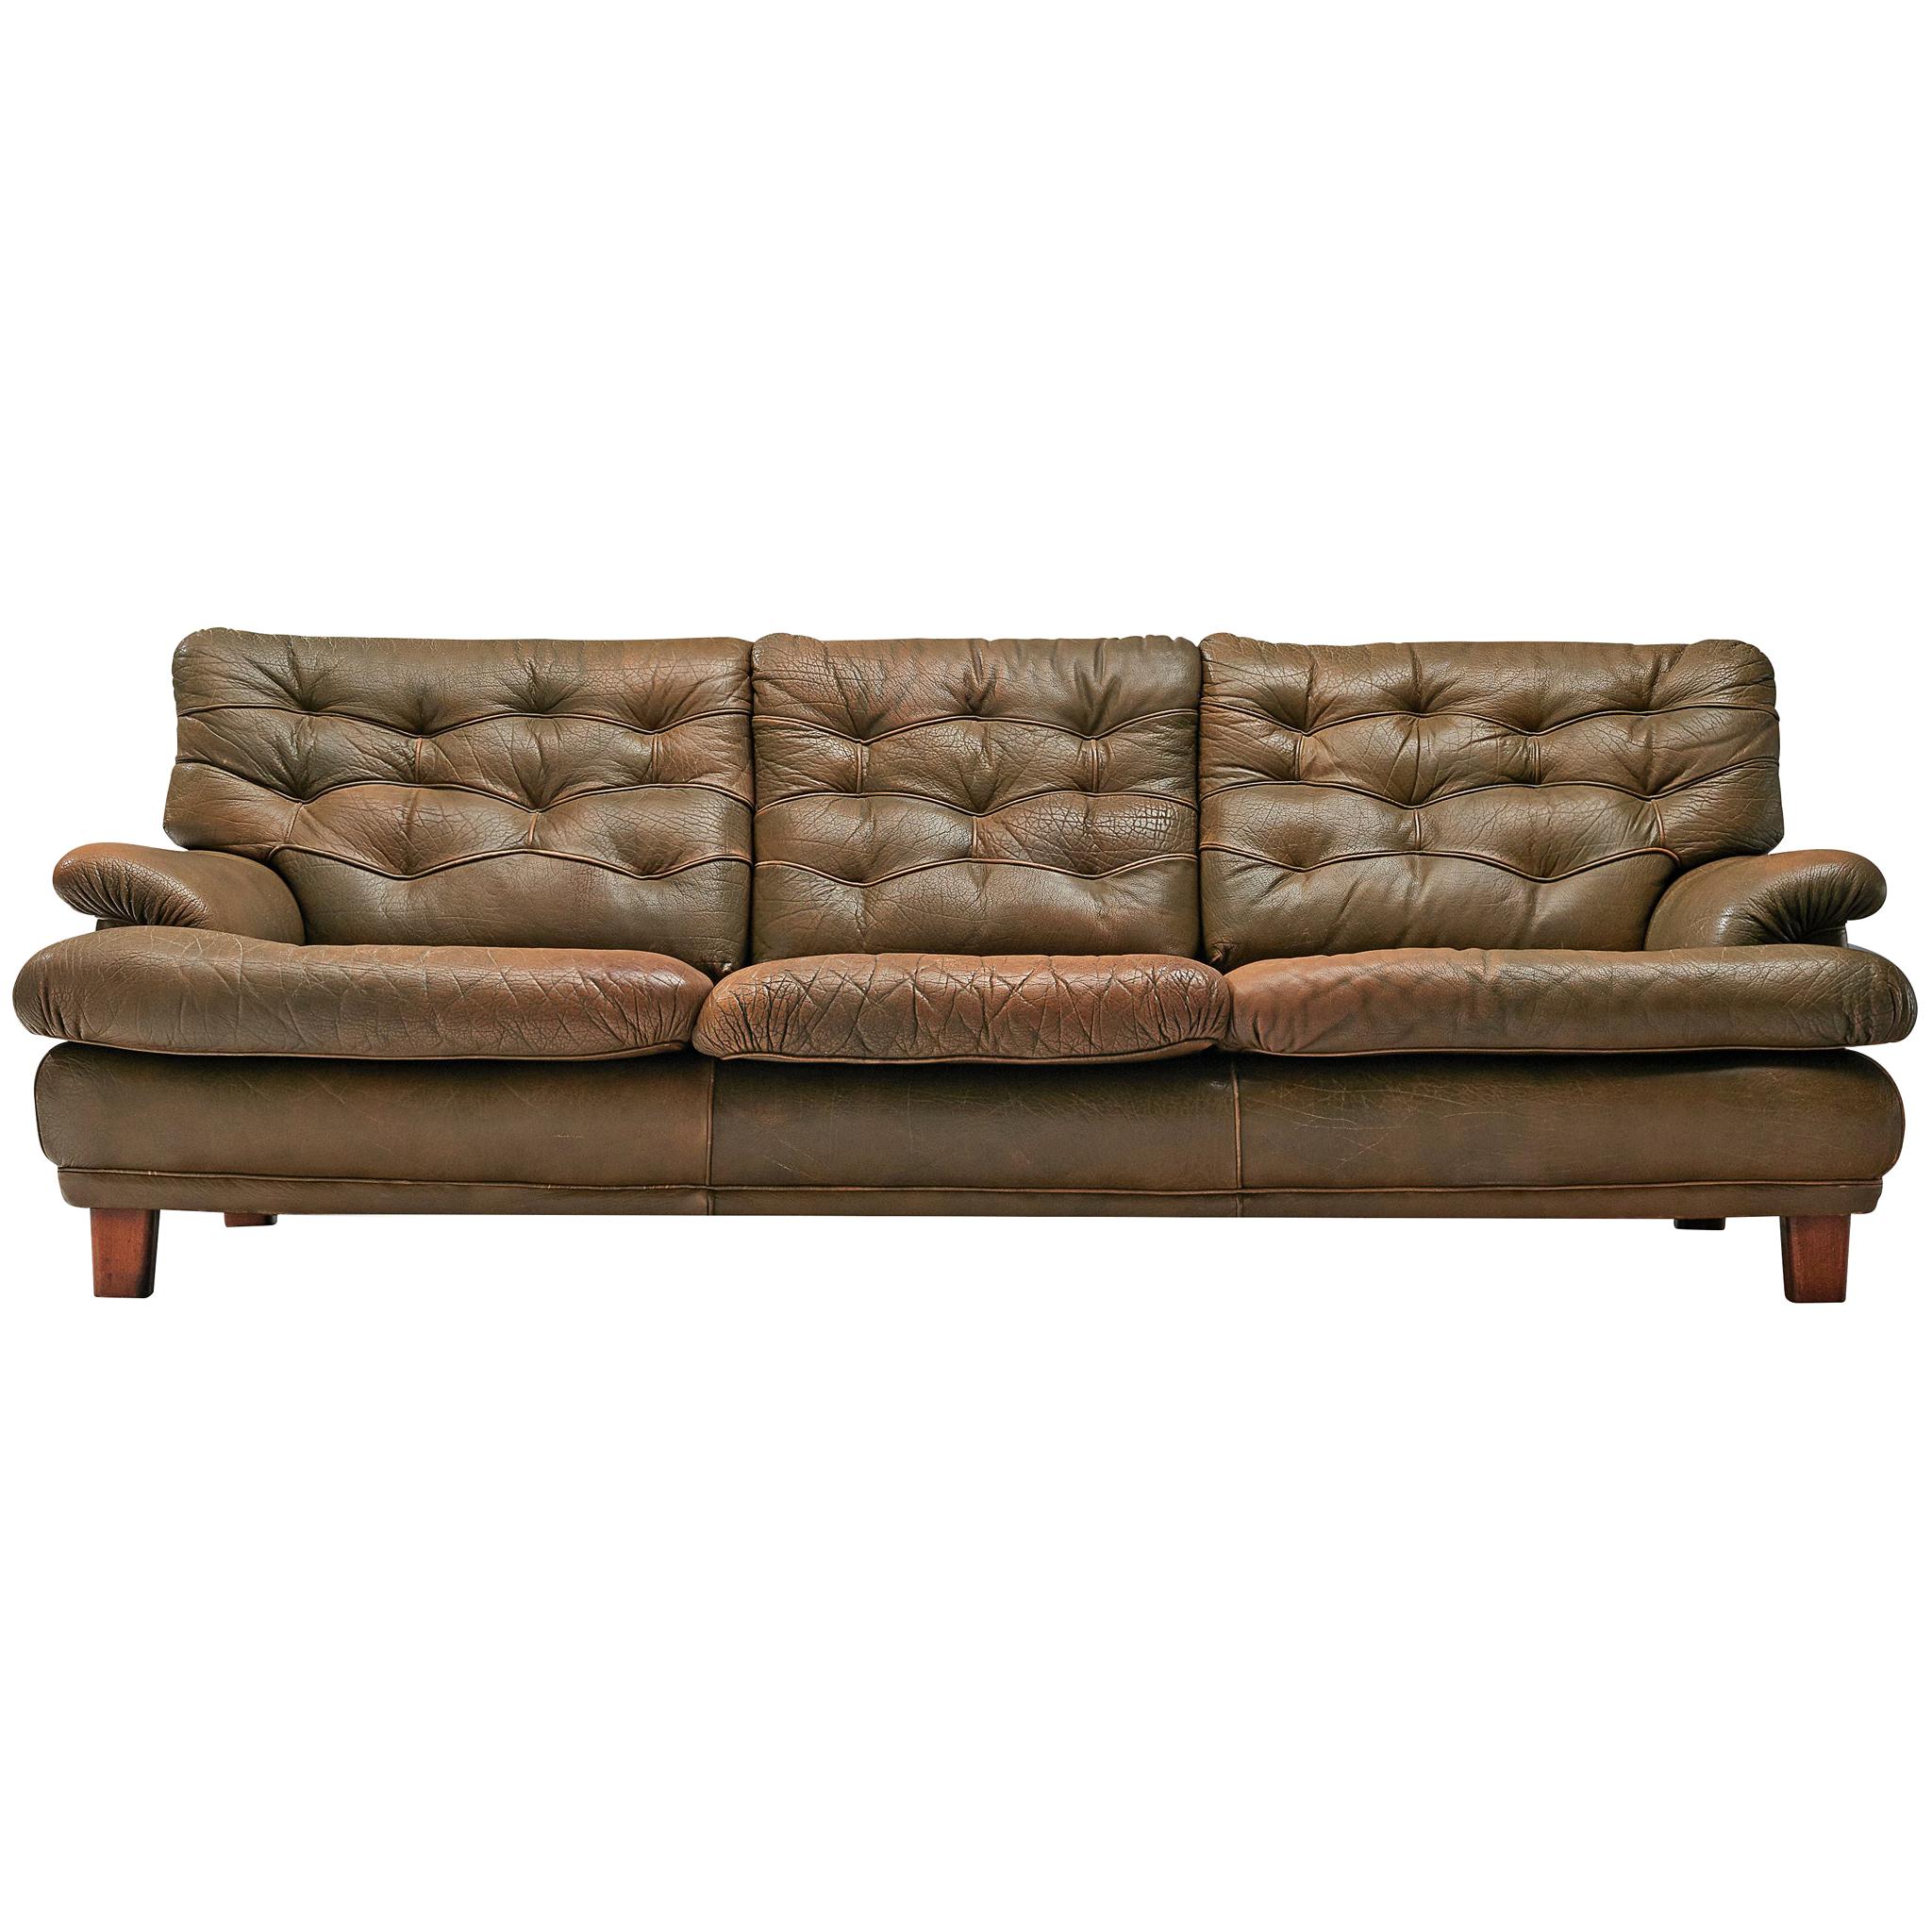 Arne Norell Three-Seat Sofa in Patinated Olive Green Leather